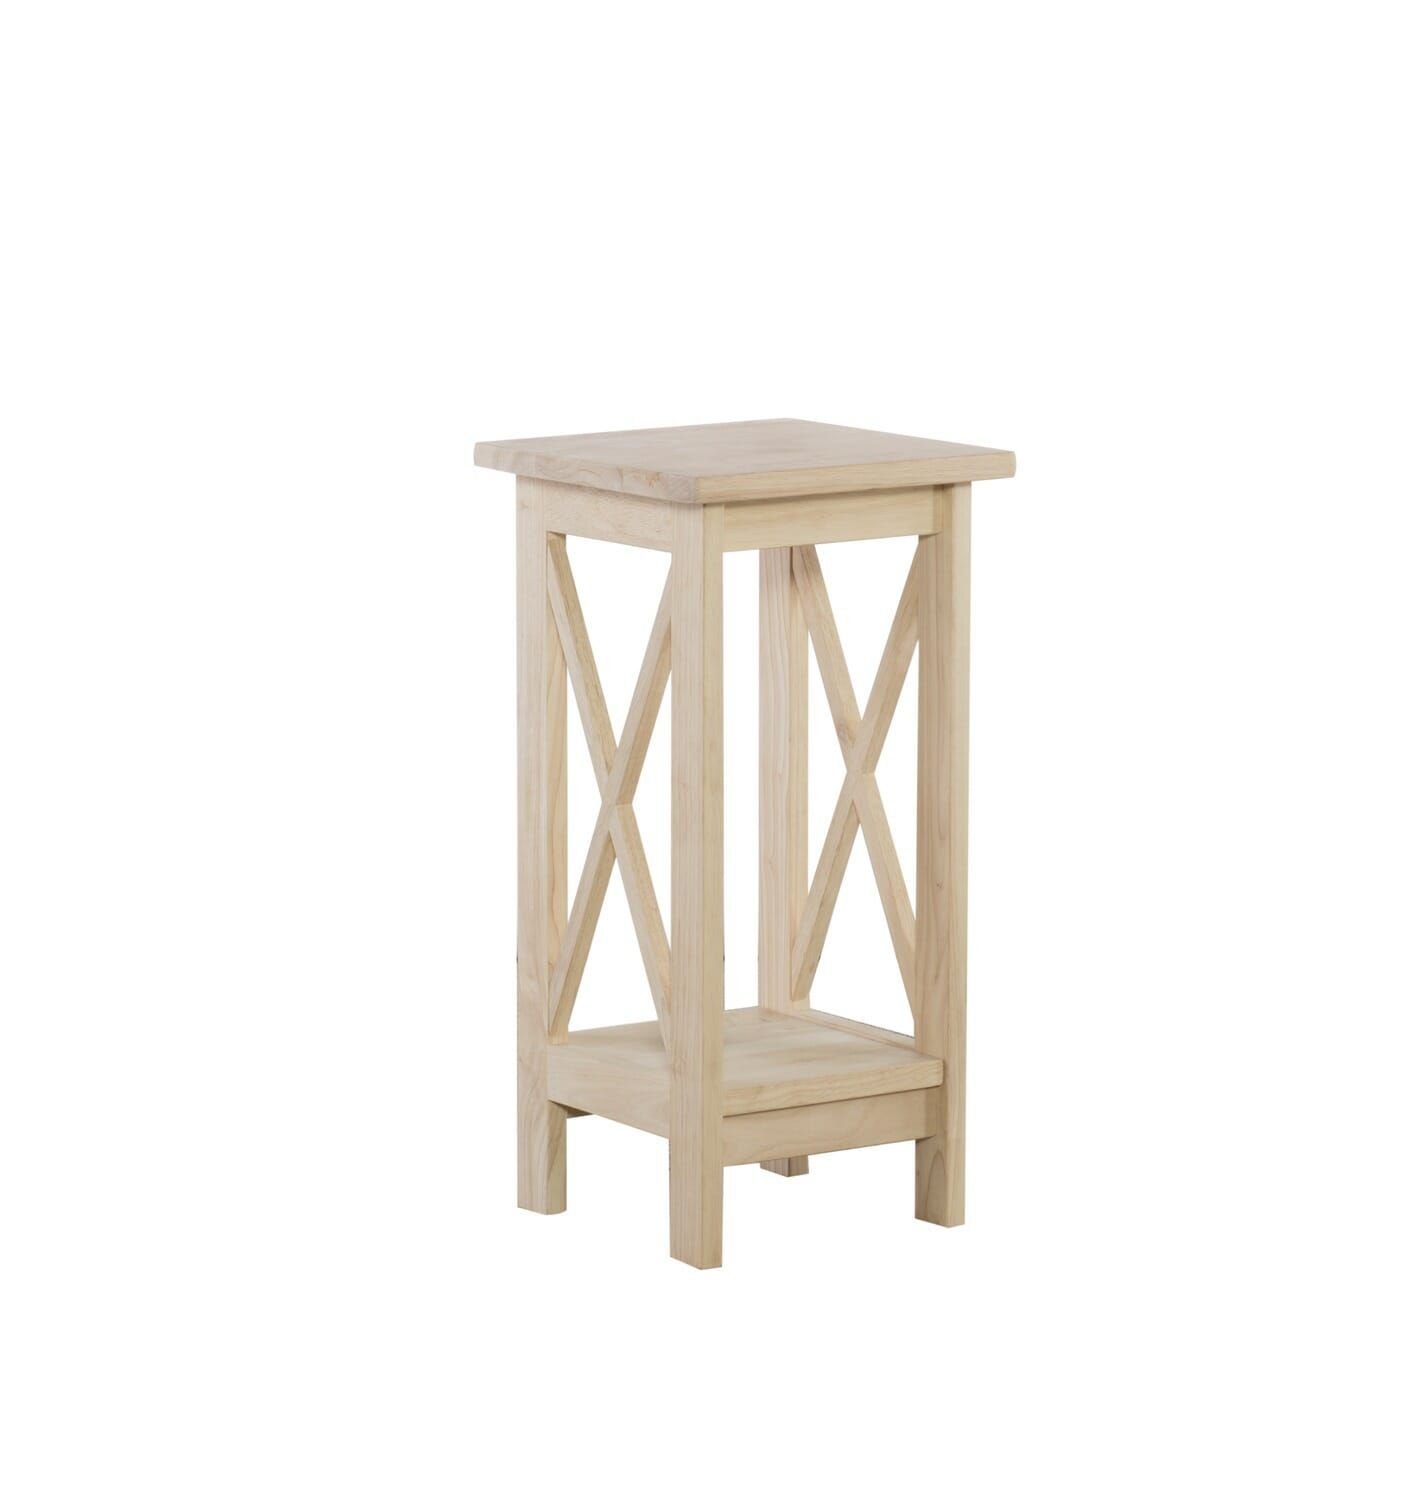 3071X 24 Inch Tall X Sided Plant Stand | Unfinished Furniture Of Wilmington With Unfinished Plant Stands (View 1 of 15)